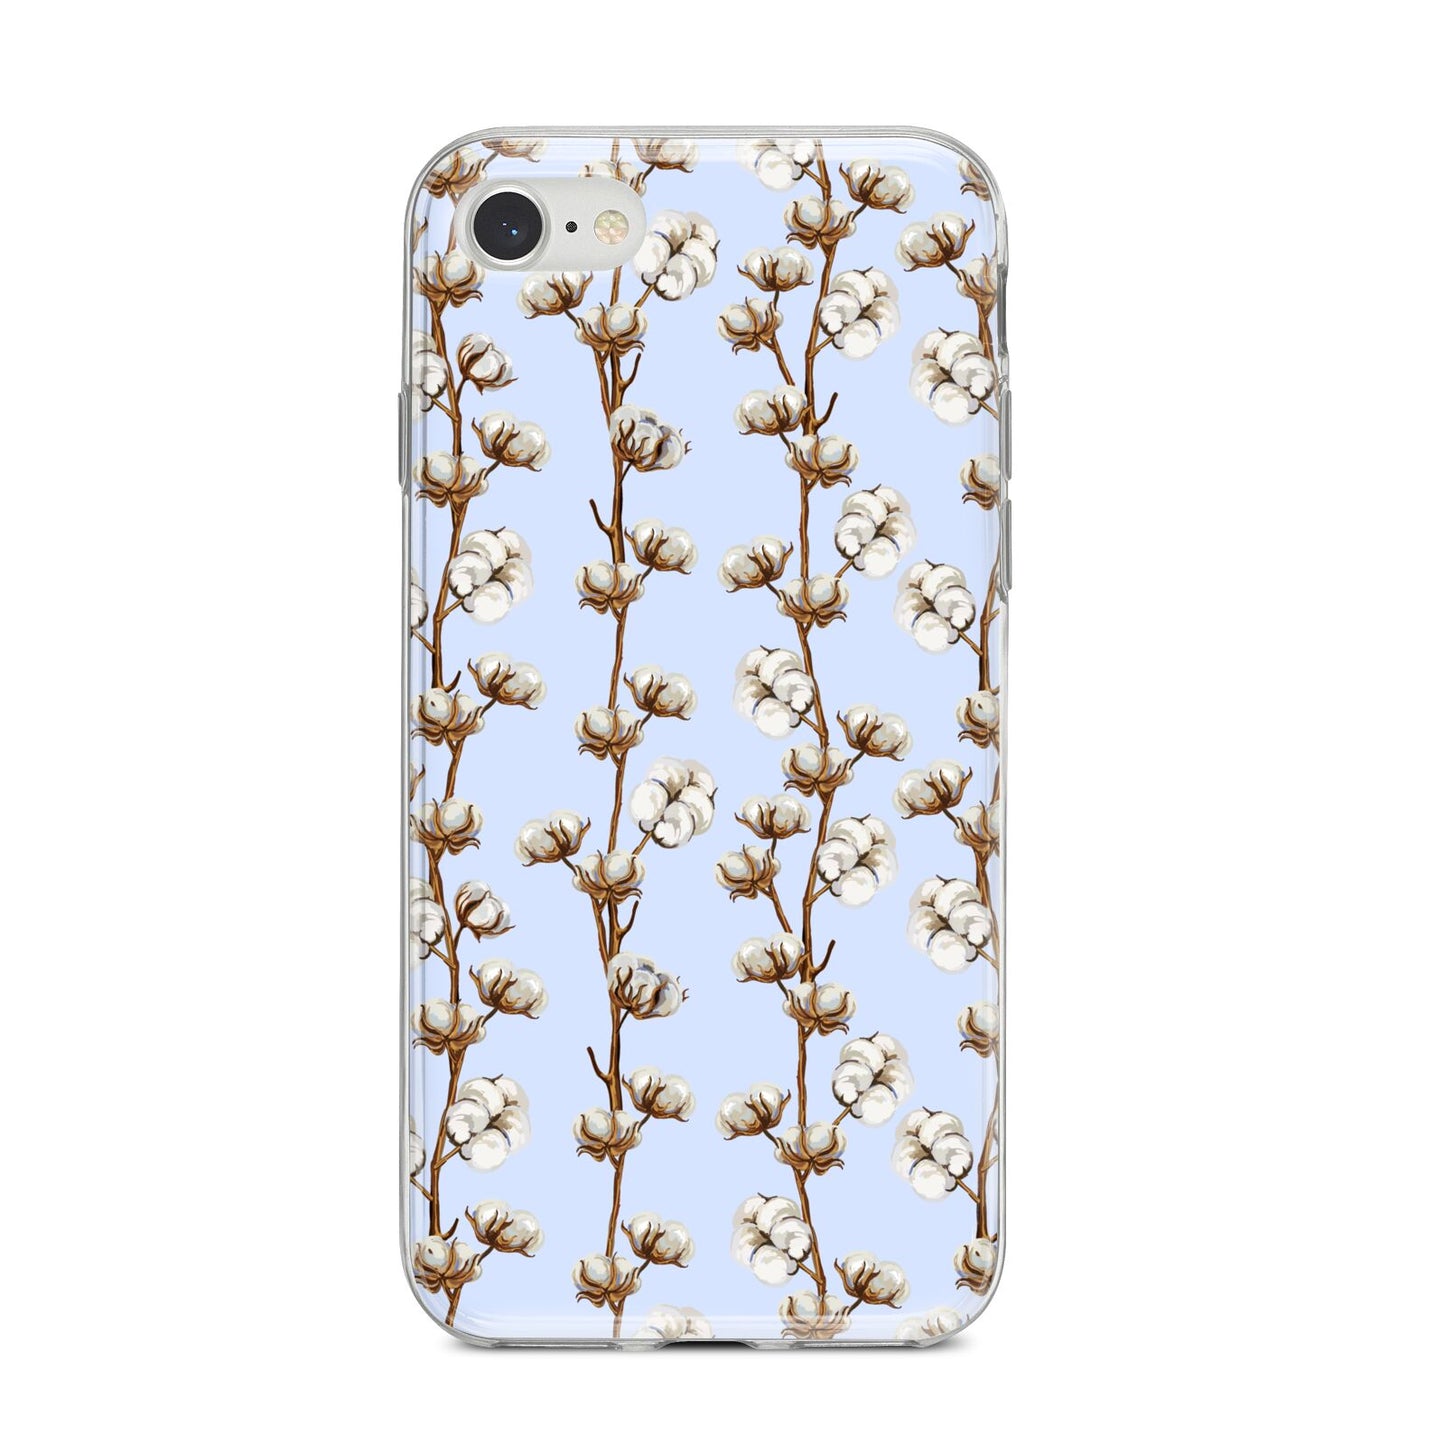 Cotton Branch iPhone 8 Bumper Case on Silver iPhone